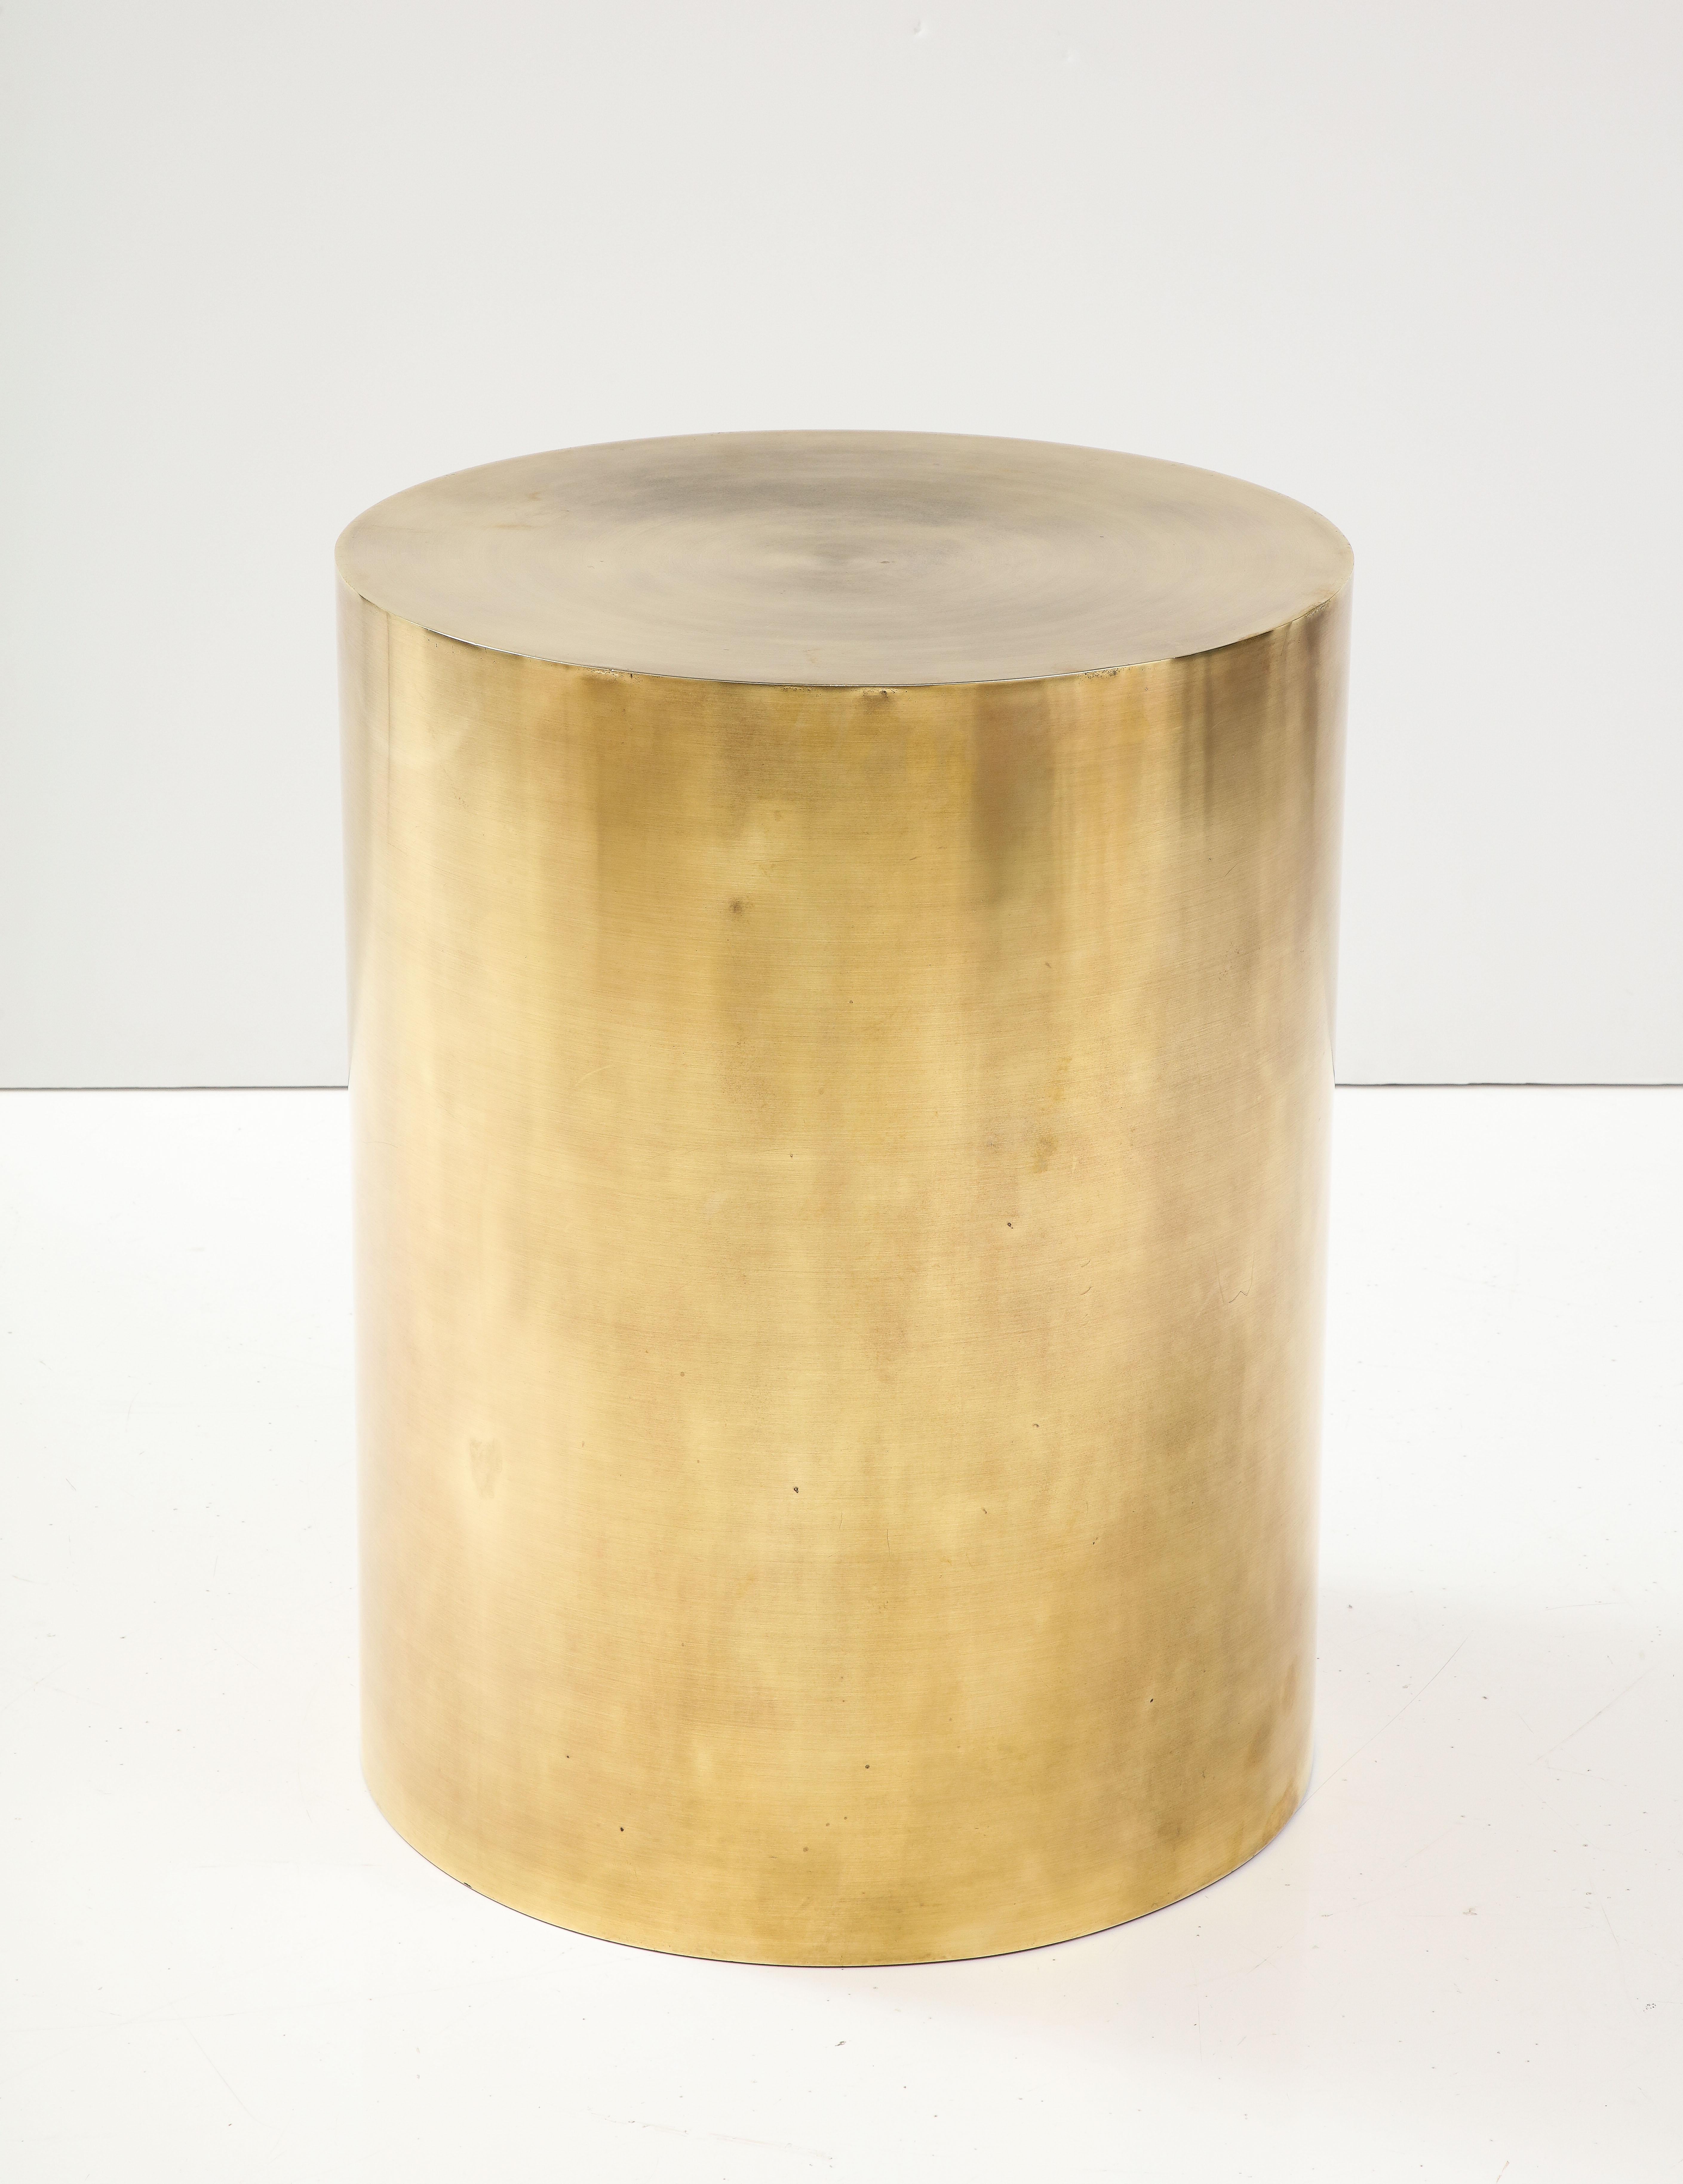 1970's Mid-Century Modern Brass Drum Dining Table Attributed To Brueton For Sale 3